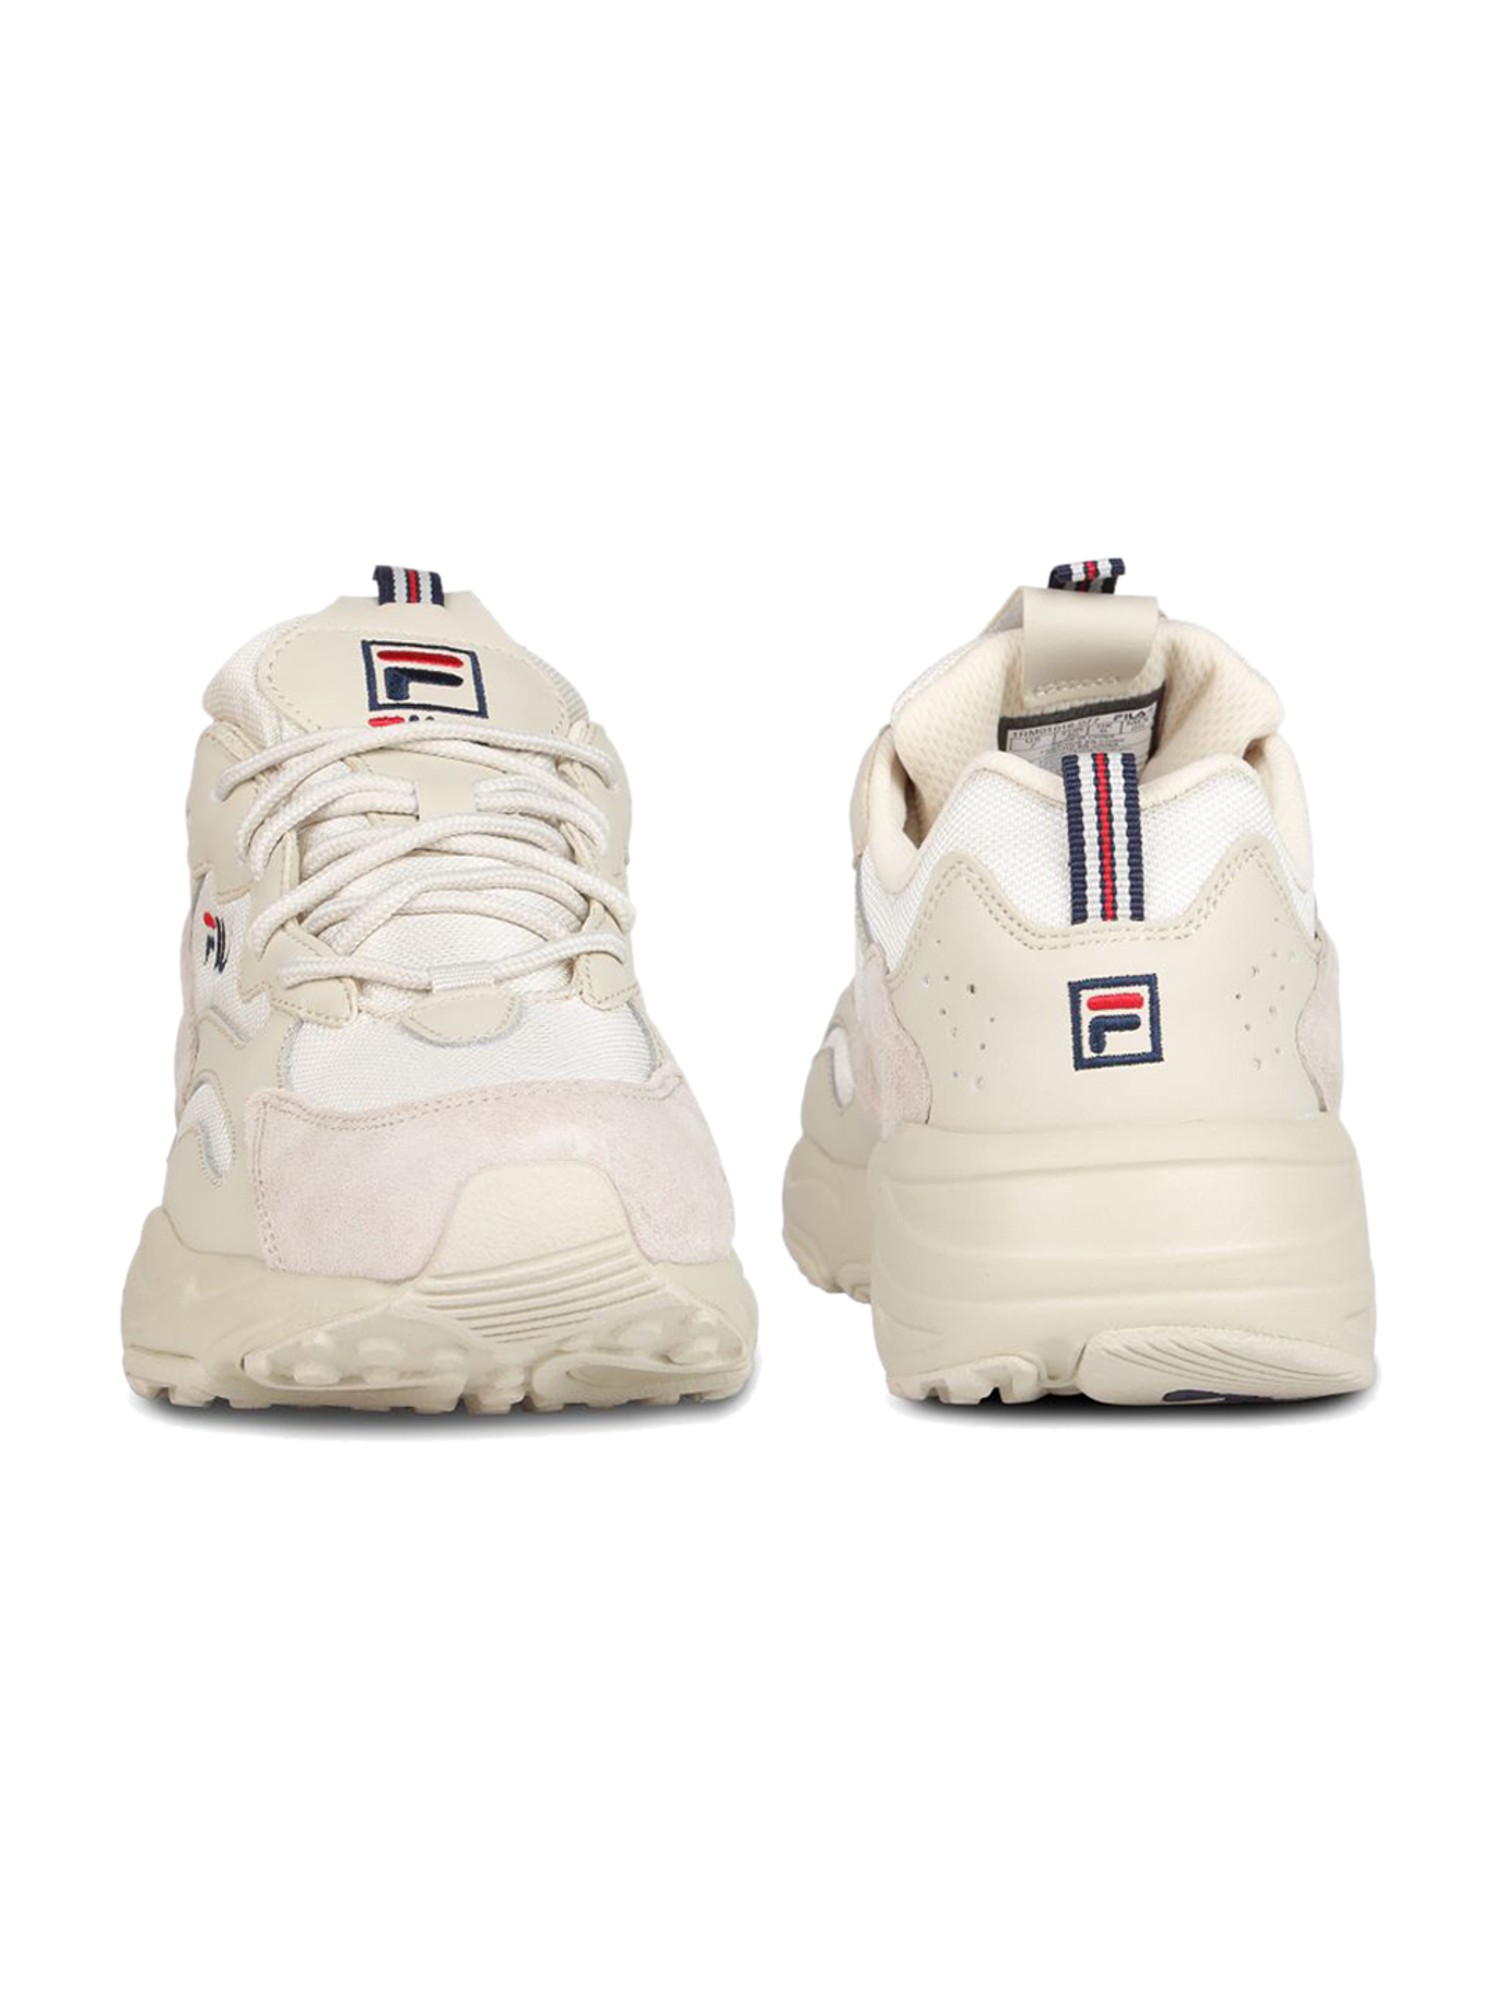 Fila Ray Tracer Off White Hotsell | www.medialit.org